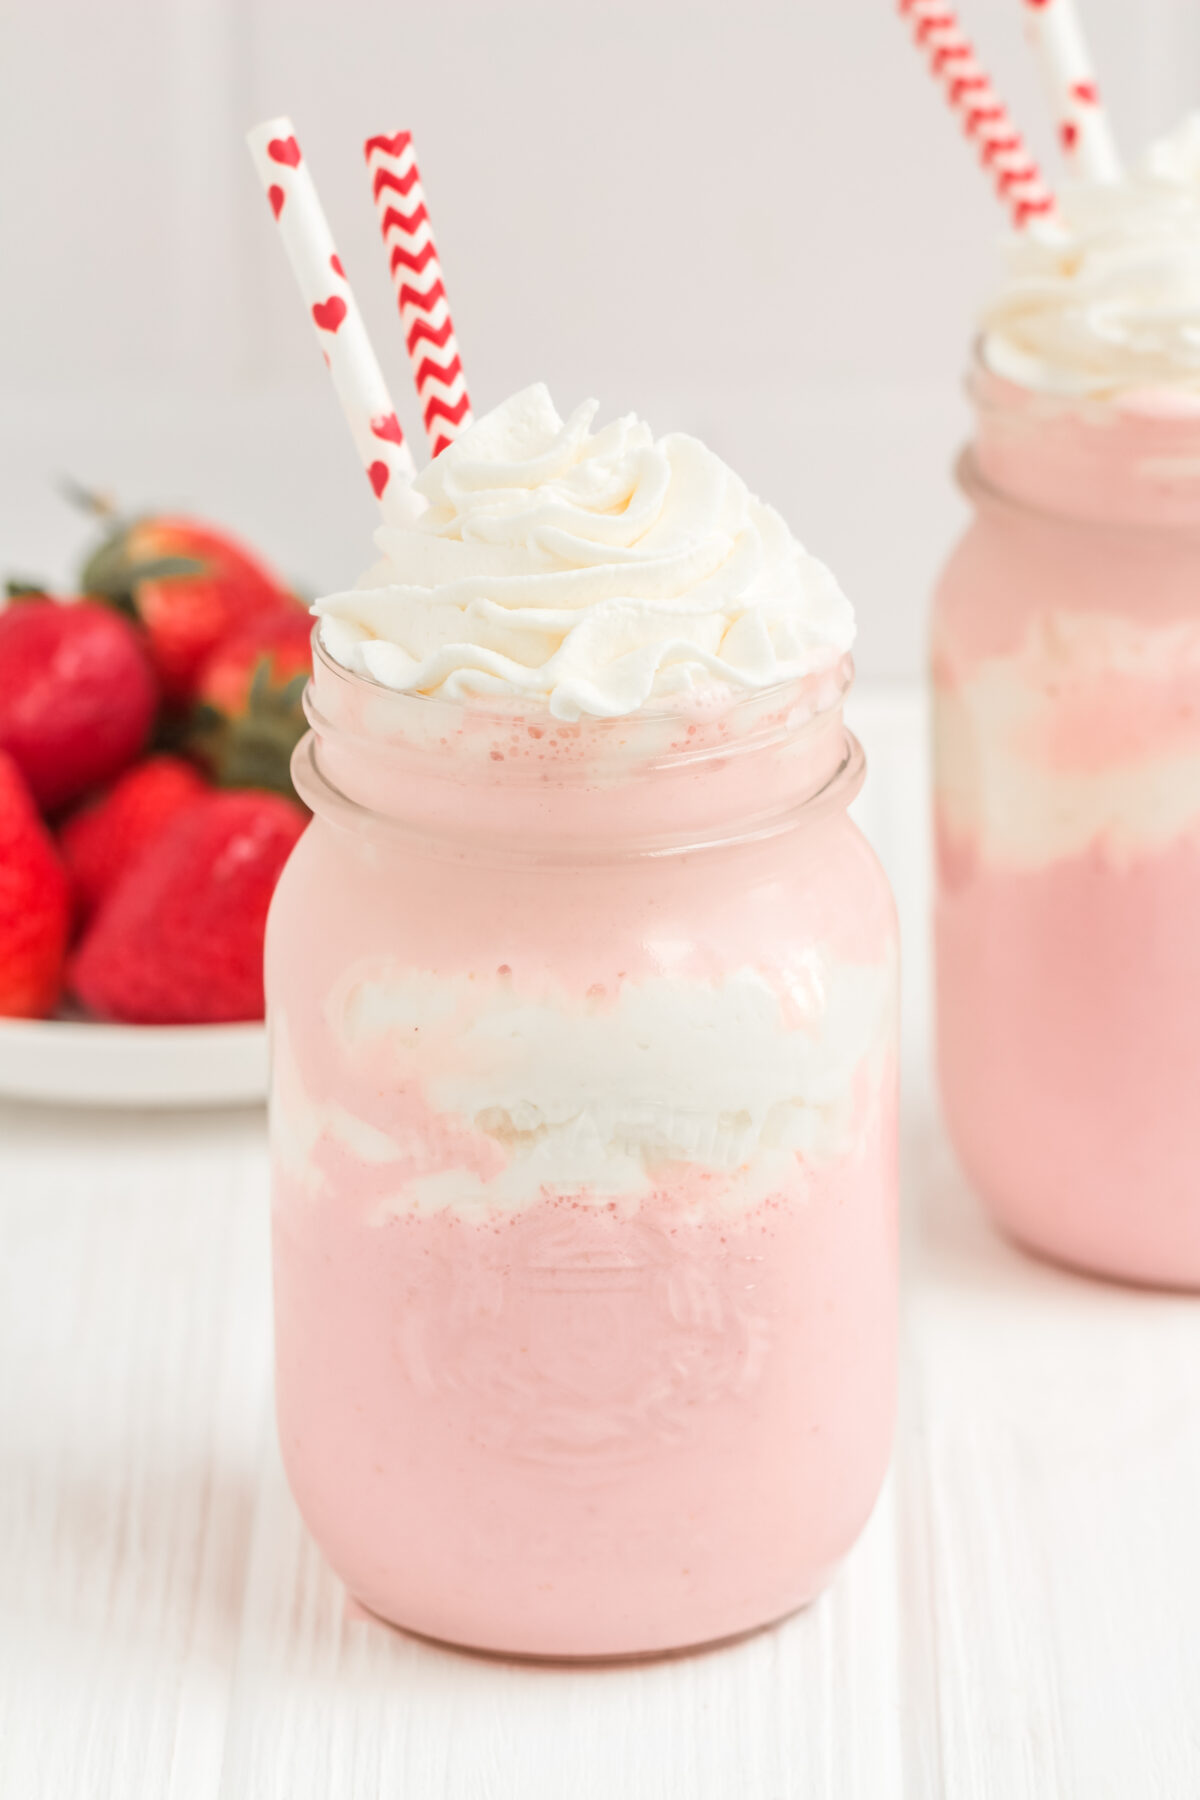 The best recipe for a cool and creamy fresh strawberry milkshake. With this recipe, you will be able to make the perfect shake every time!